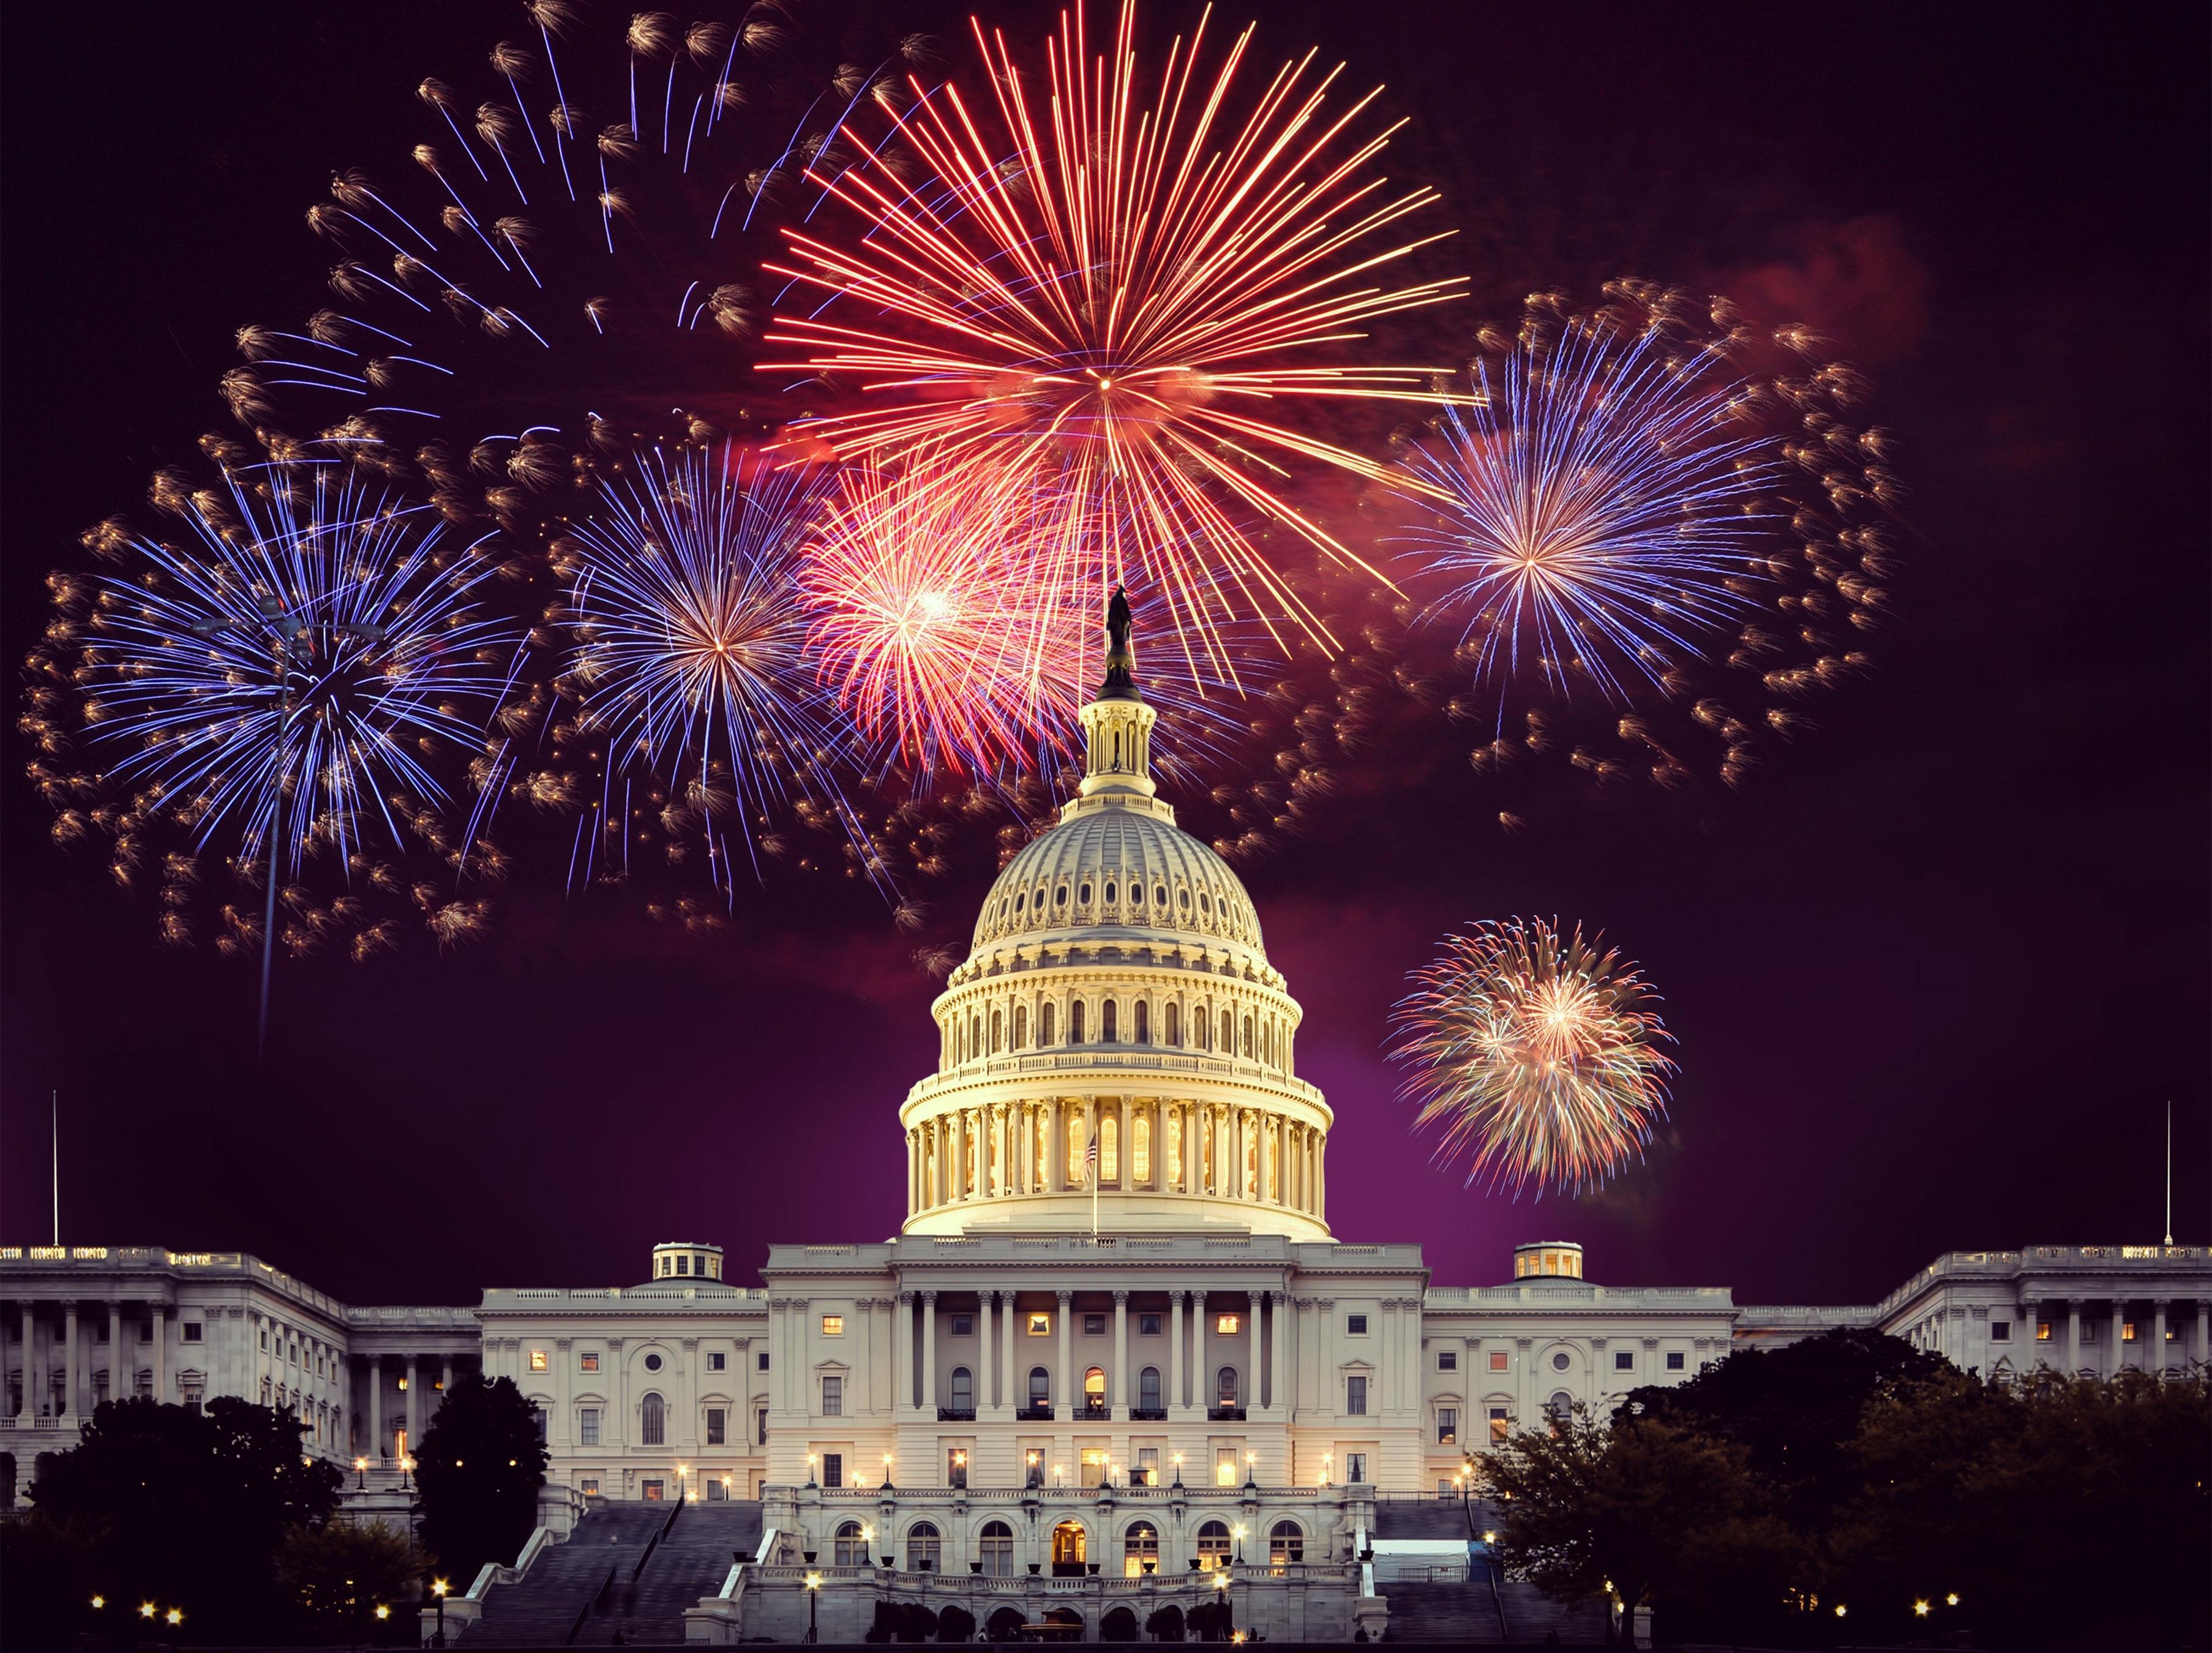 Fireworks over the U.S. capitol